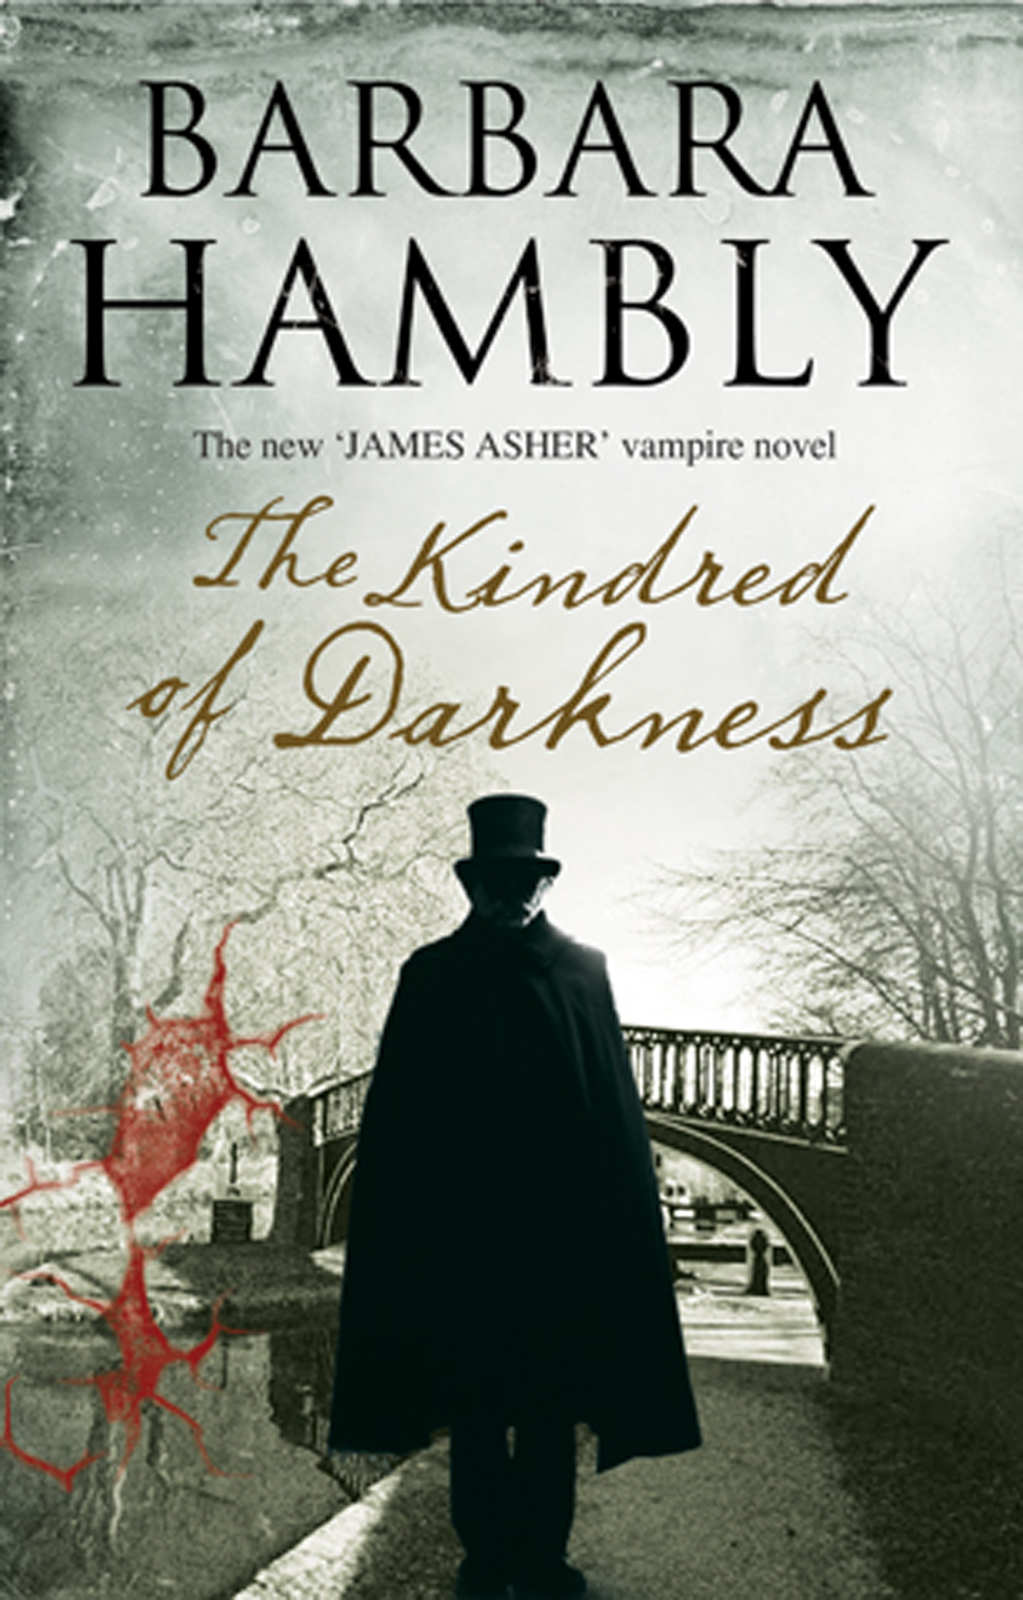 The Kindred of Darkness (2013) by Barbara Hambly